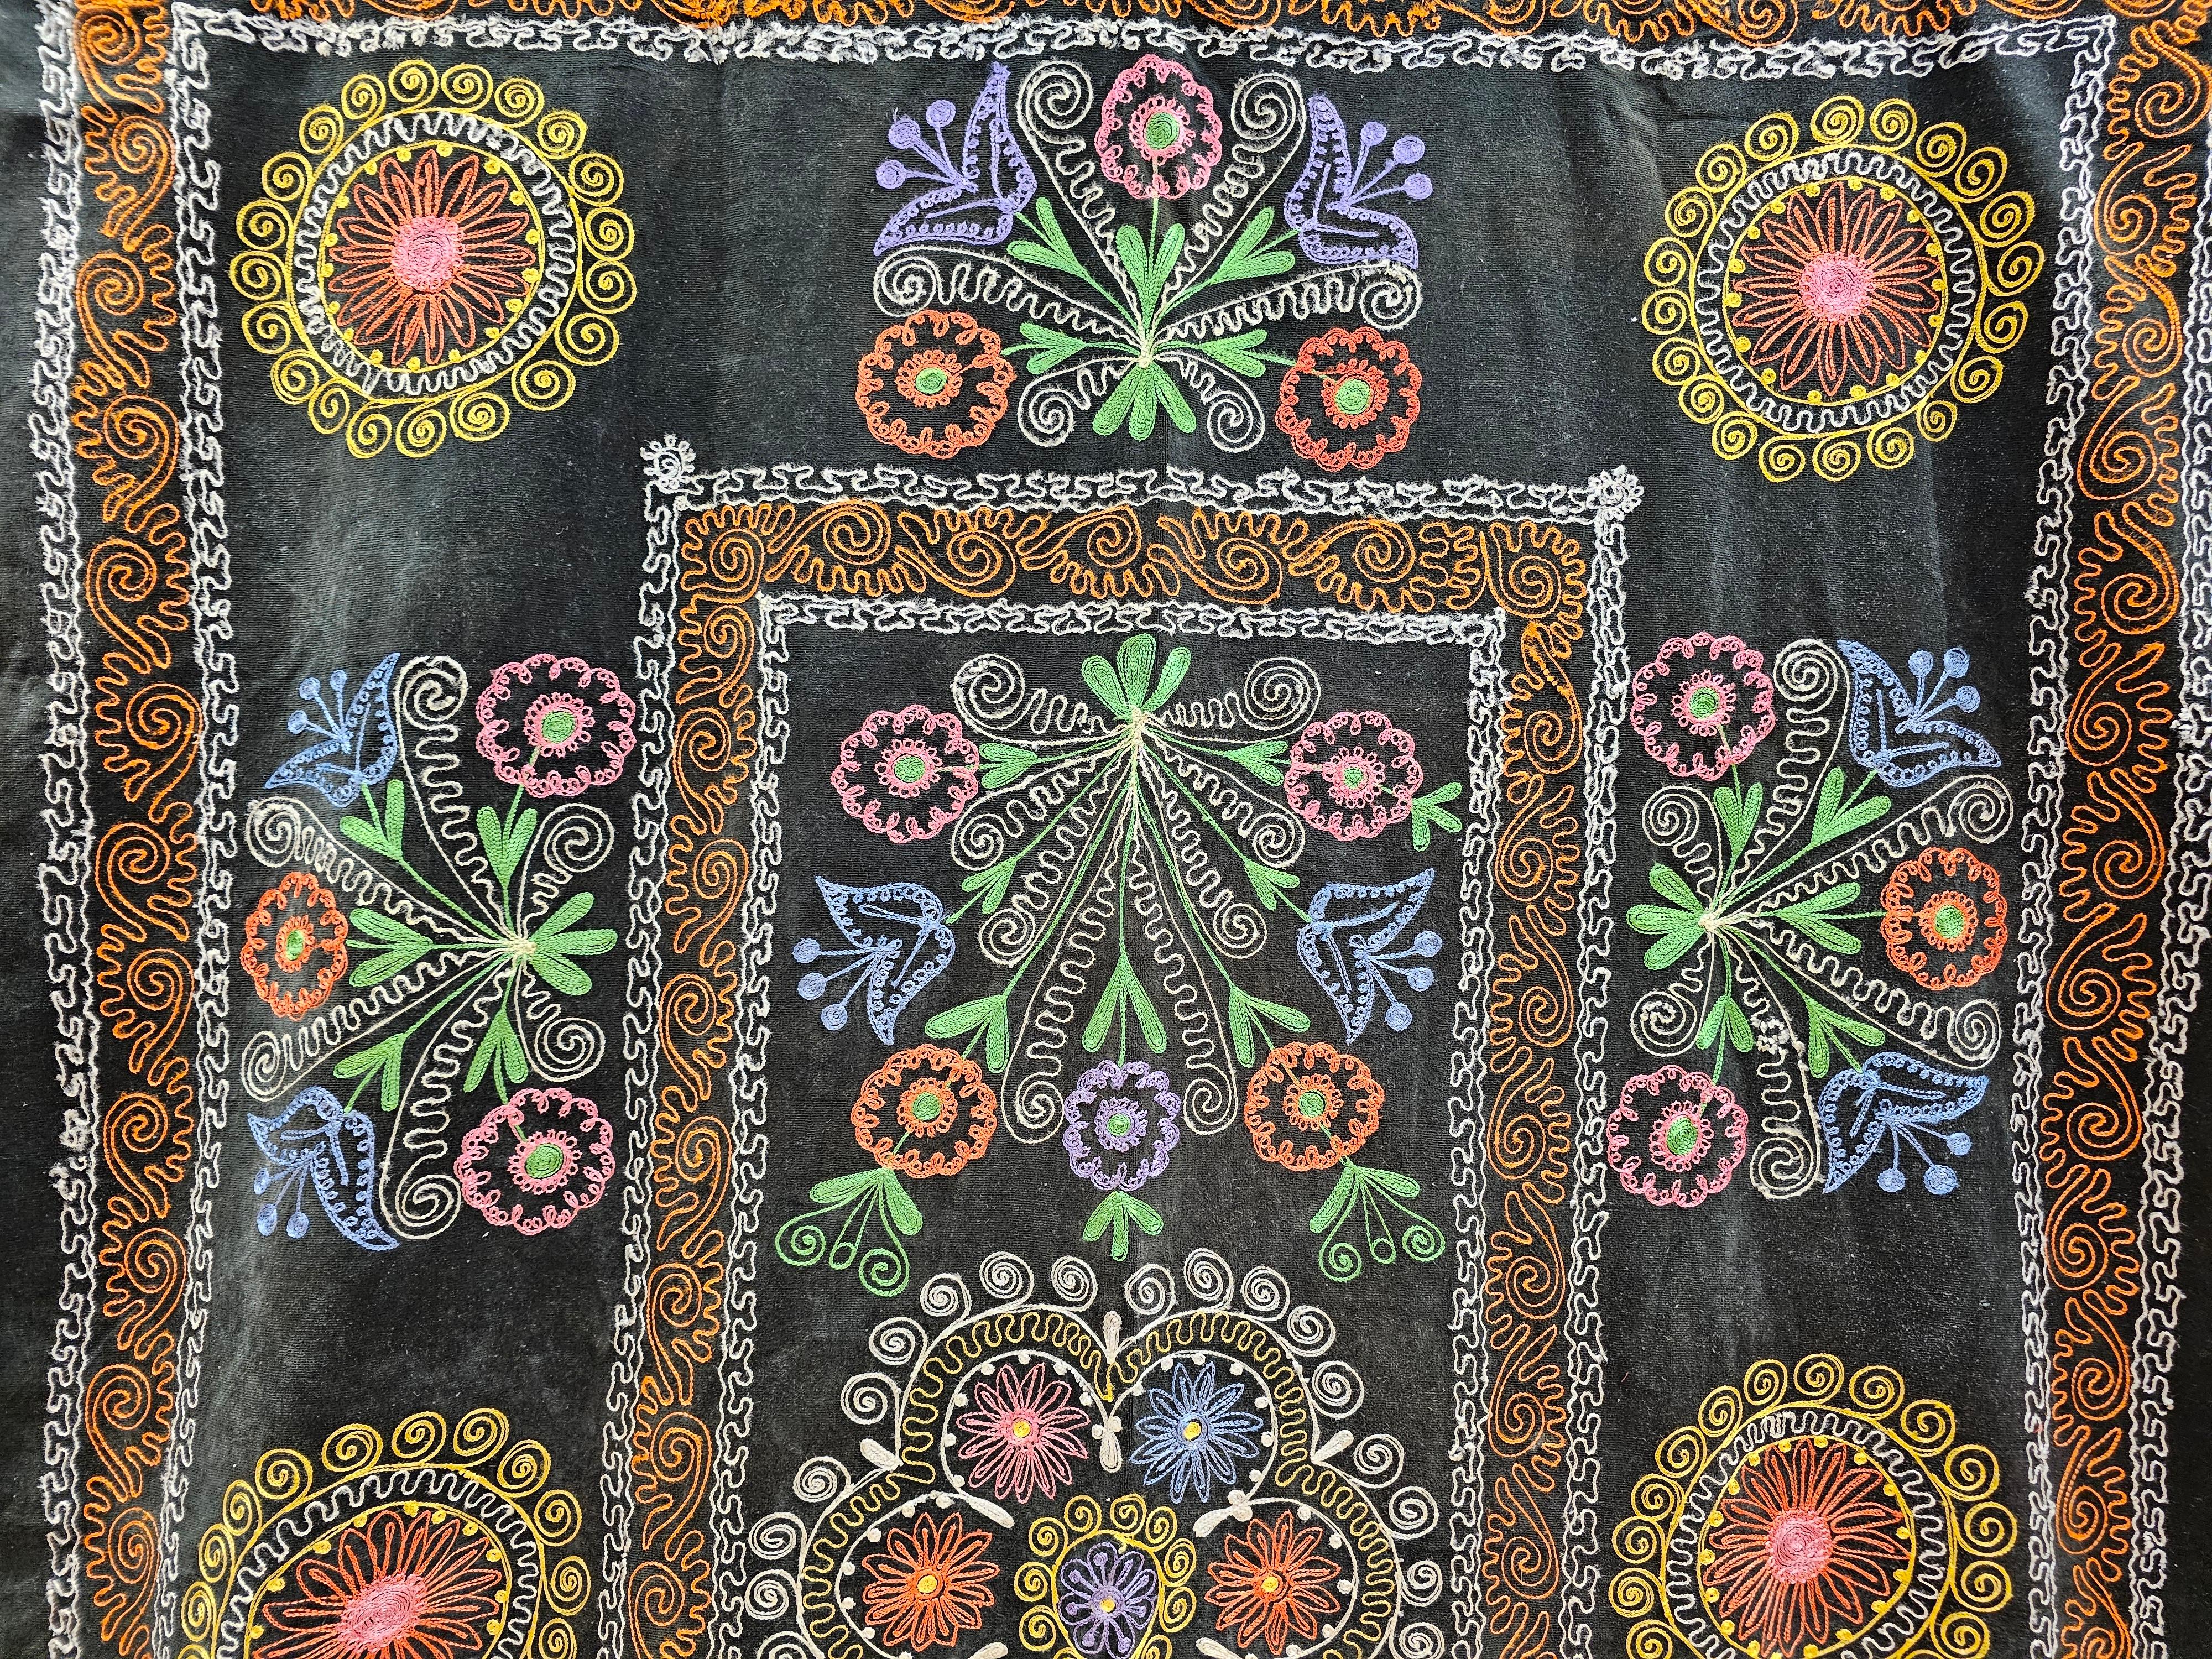 Hand-Crafted Vintage Uzbek Silk Embroidery Suzani in Black, Red, Green, Ivory, Blue For Sale